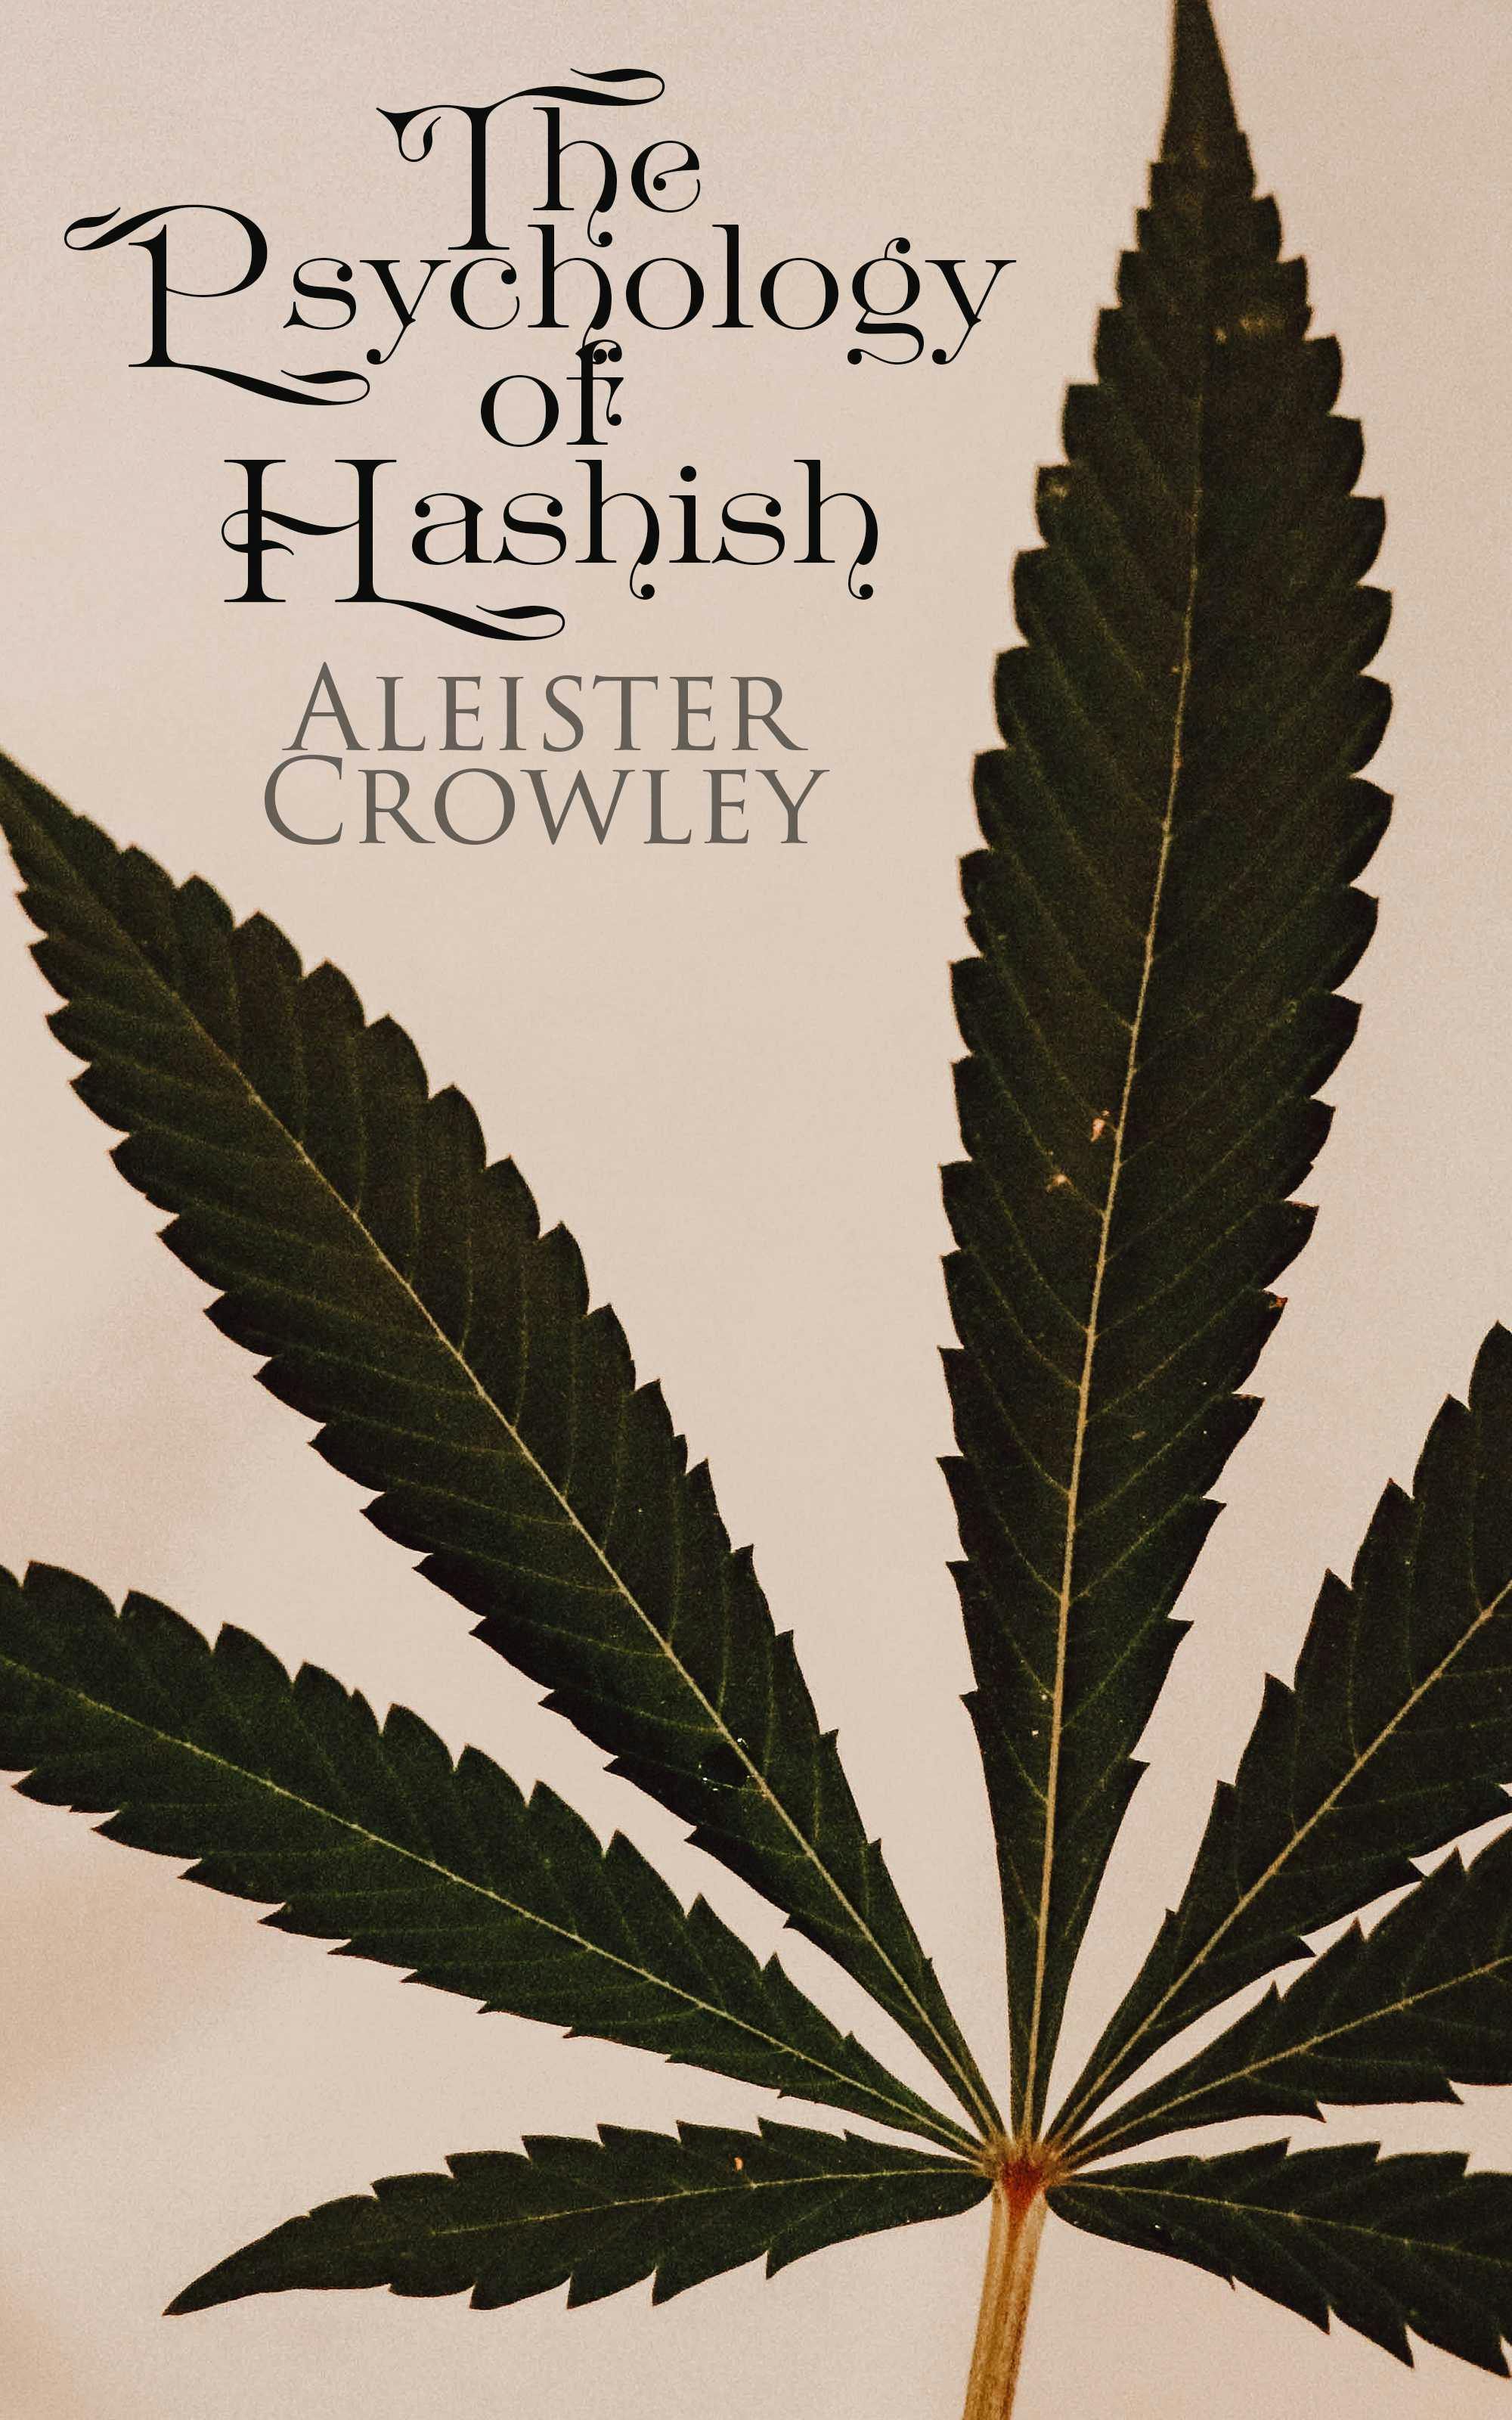 The Psychology of Hashish - Aleister Crowley